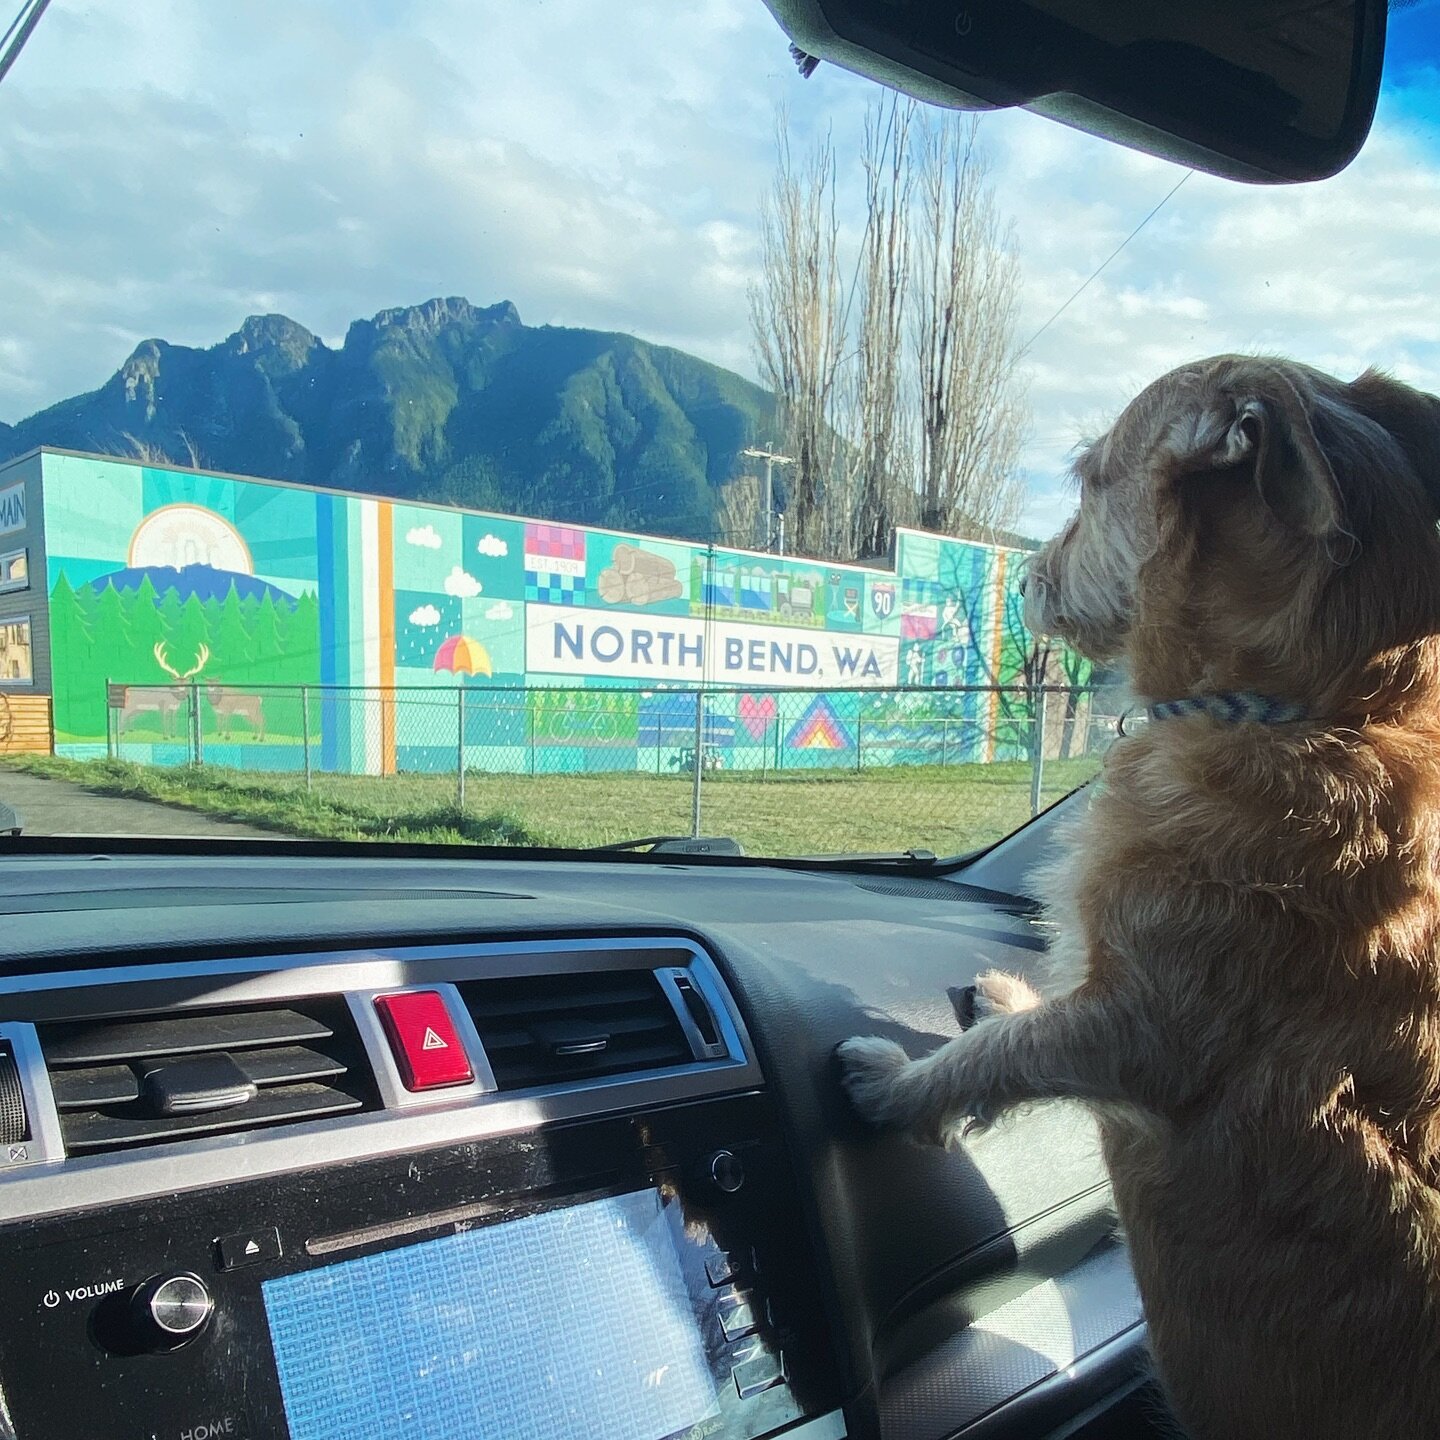 &hellip; ✨ &hellip; 🐕 &hellip; 👩🏼&zwj;🎨 &hellip; 💗 &hellip;
.
When your pup gets excited to see your mural! 🥰
.
#dogmom #artislife #muralartist #snoqualmievalleymuralartist #northbendmural #mygirl